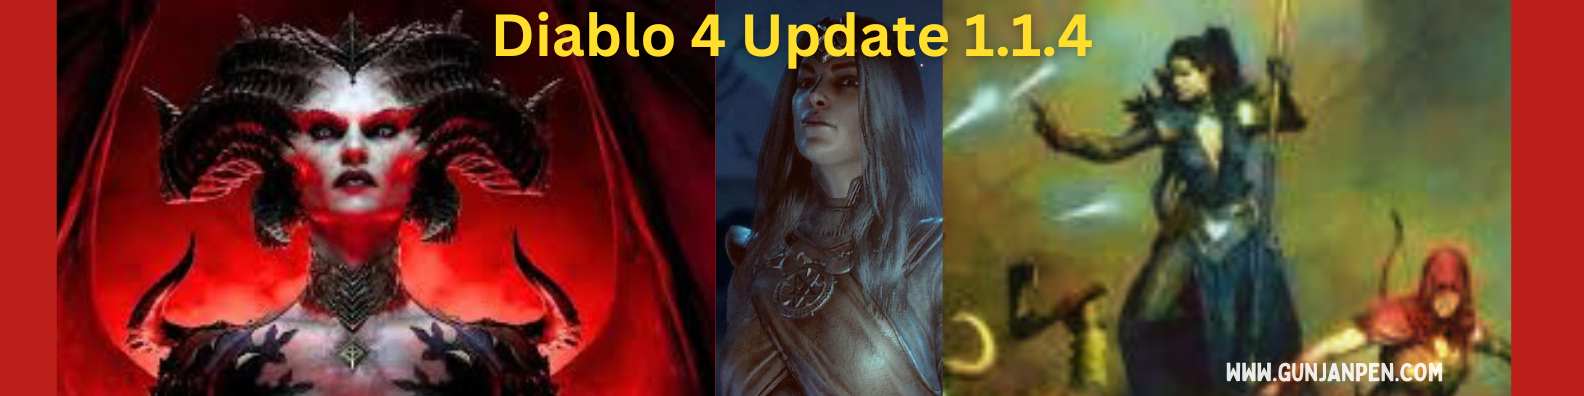 Diablo 4 Update 1.1.4: What's New in the Latest Release?